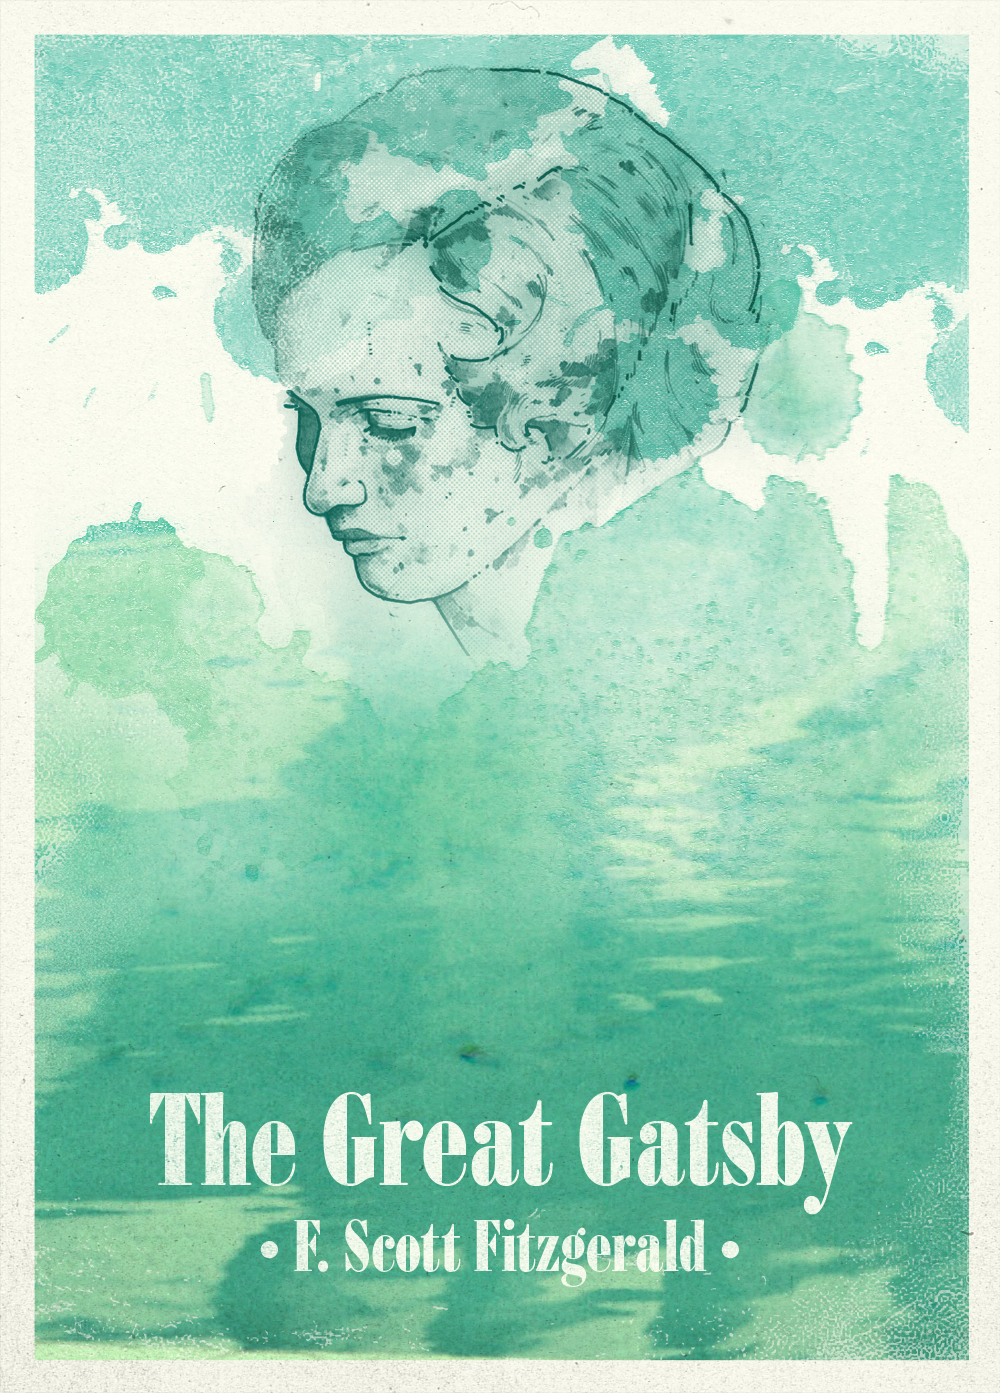 great gatsby cover redesigned by Ian O Phelan 